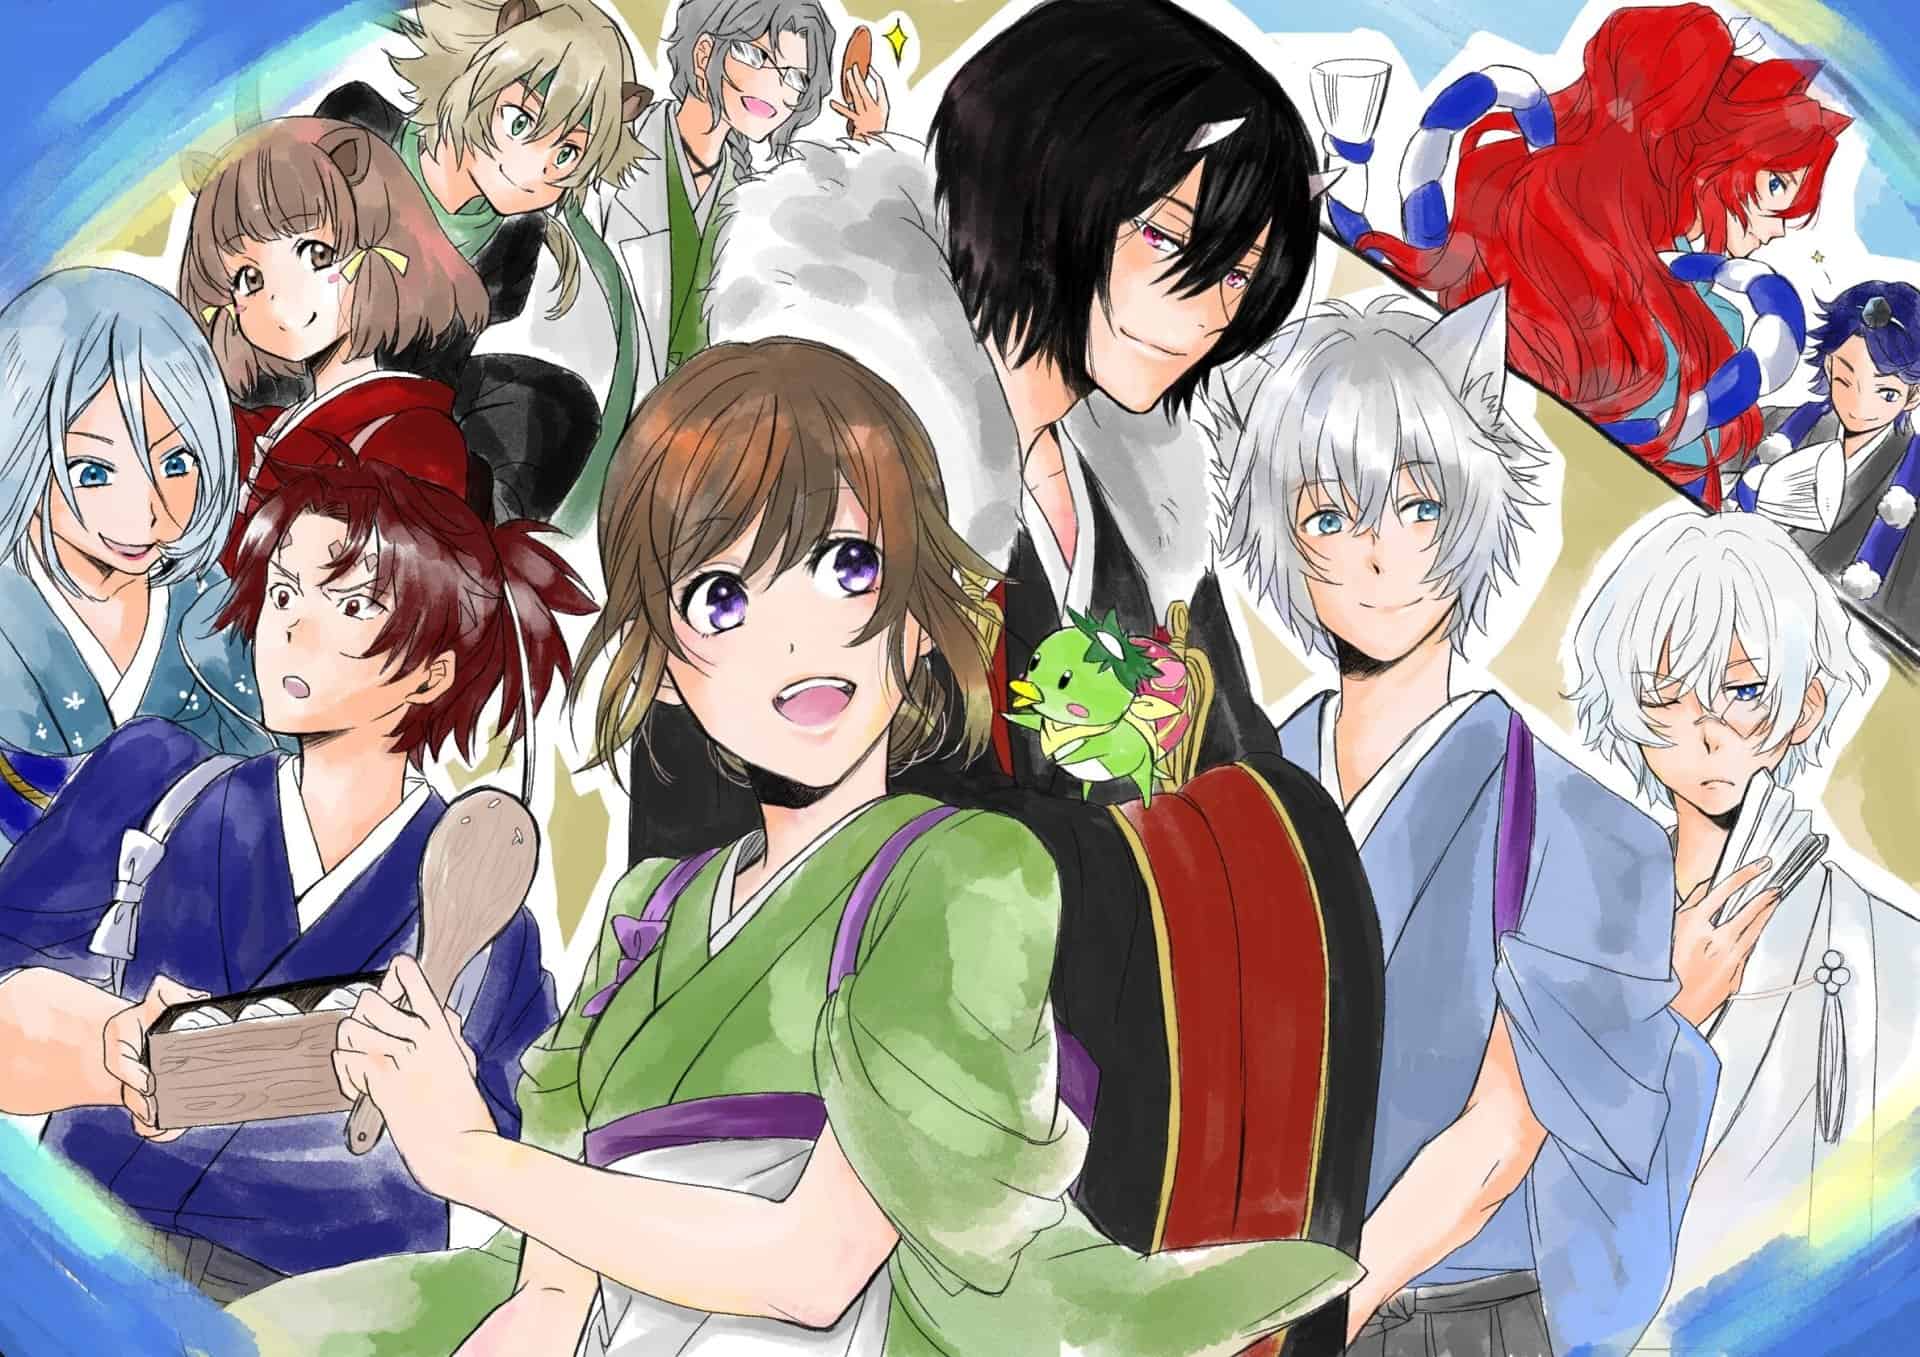 50 BEST COOKING ANIME SERIES